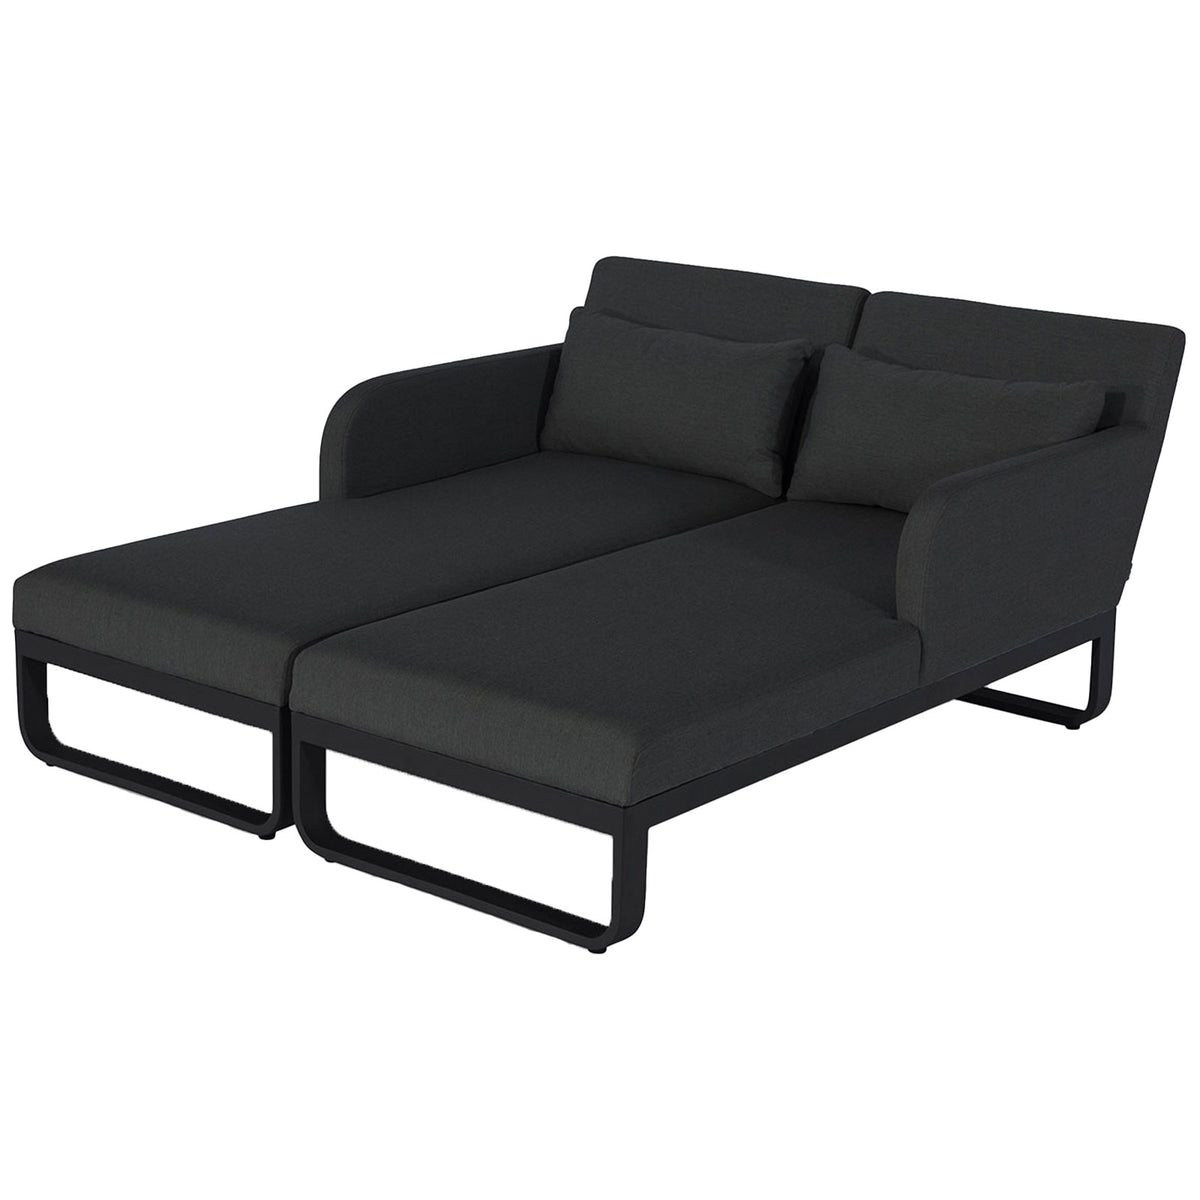 Unity Outdoor Double Sunlounger